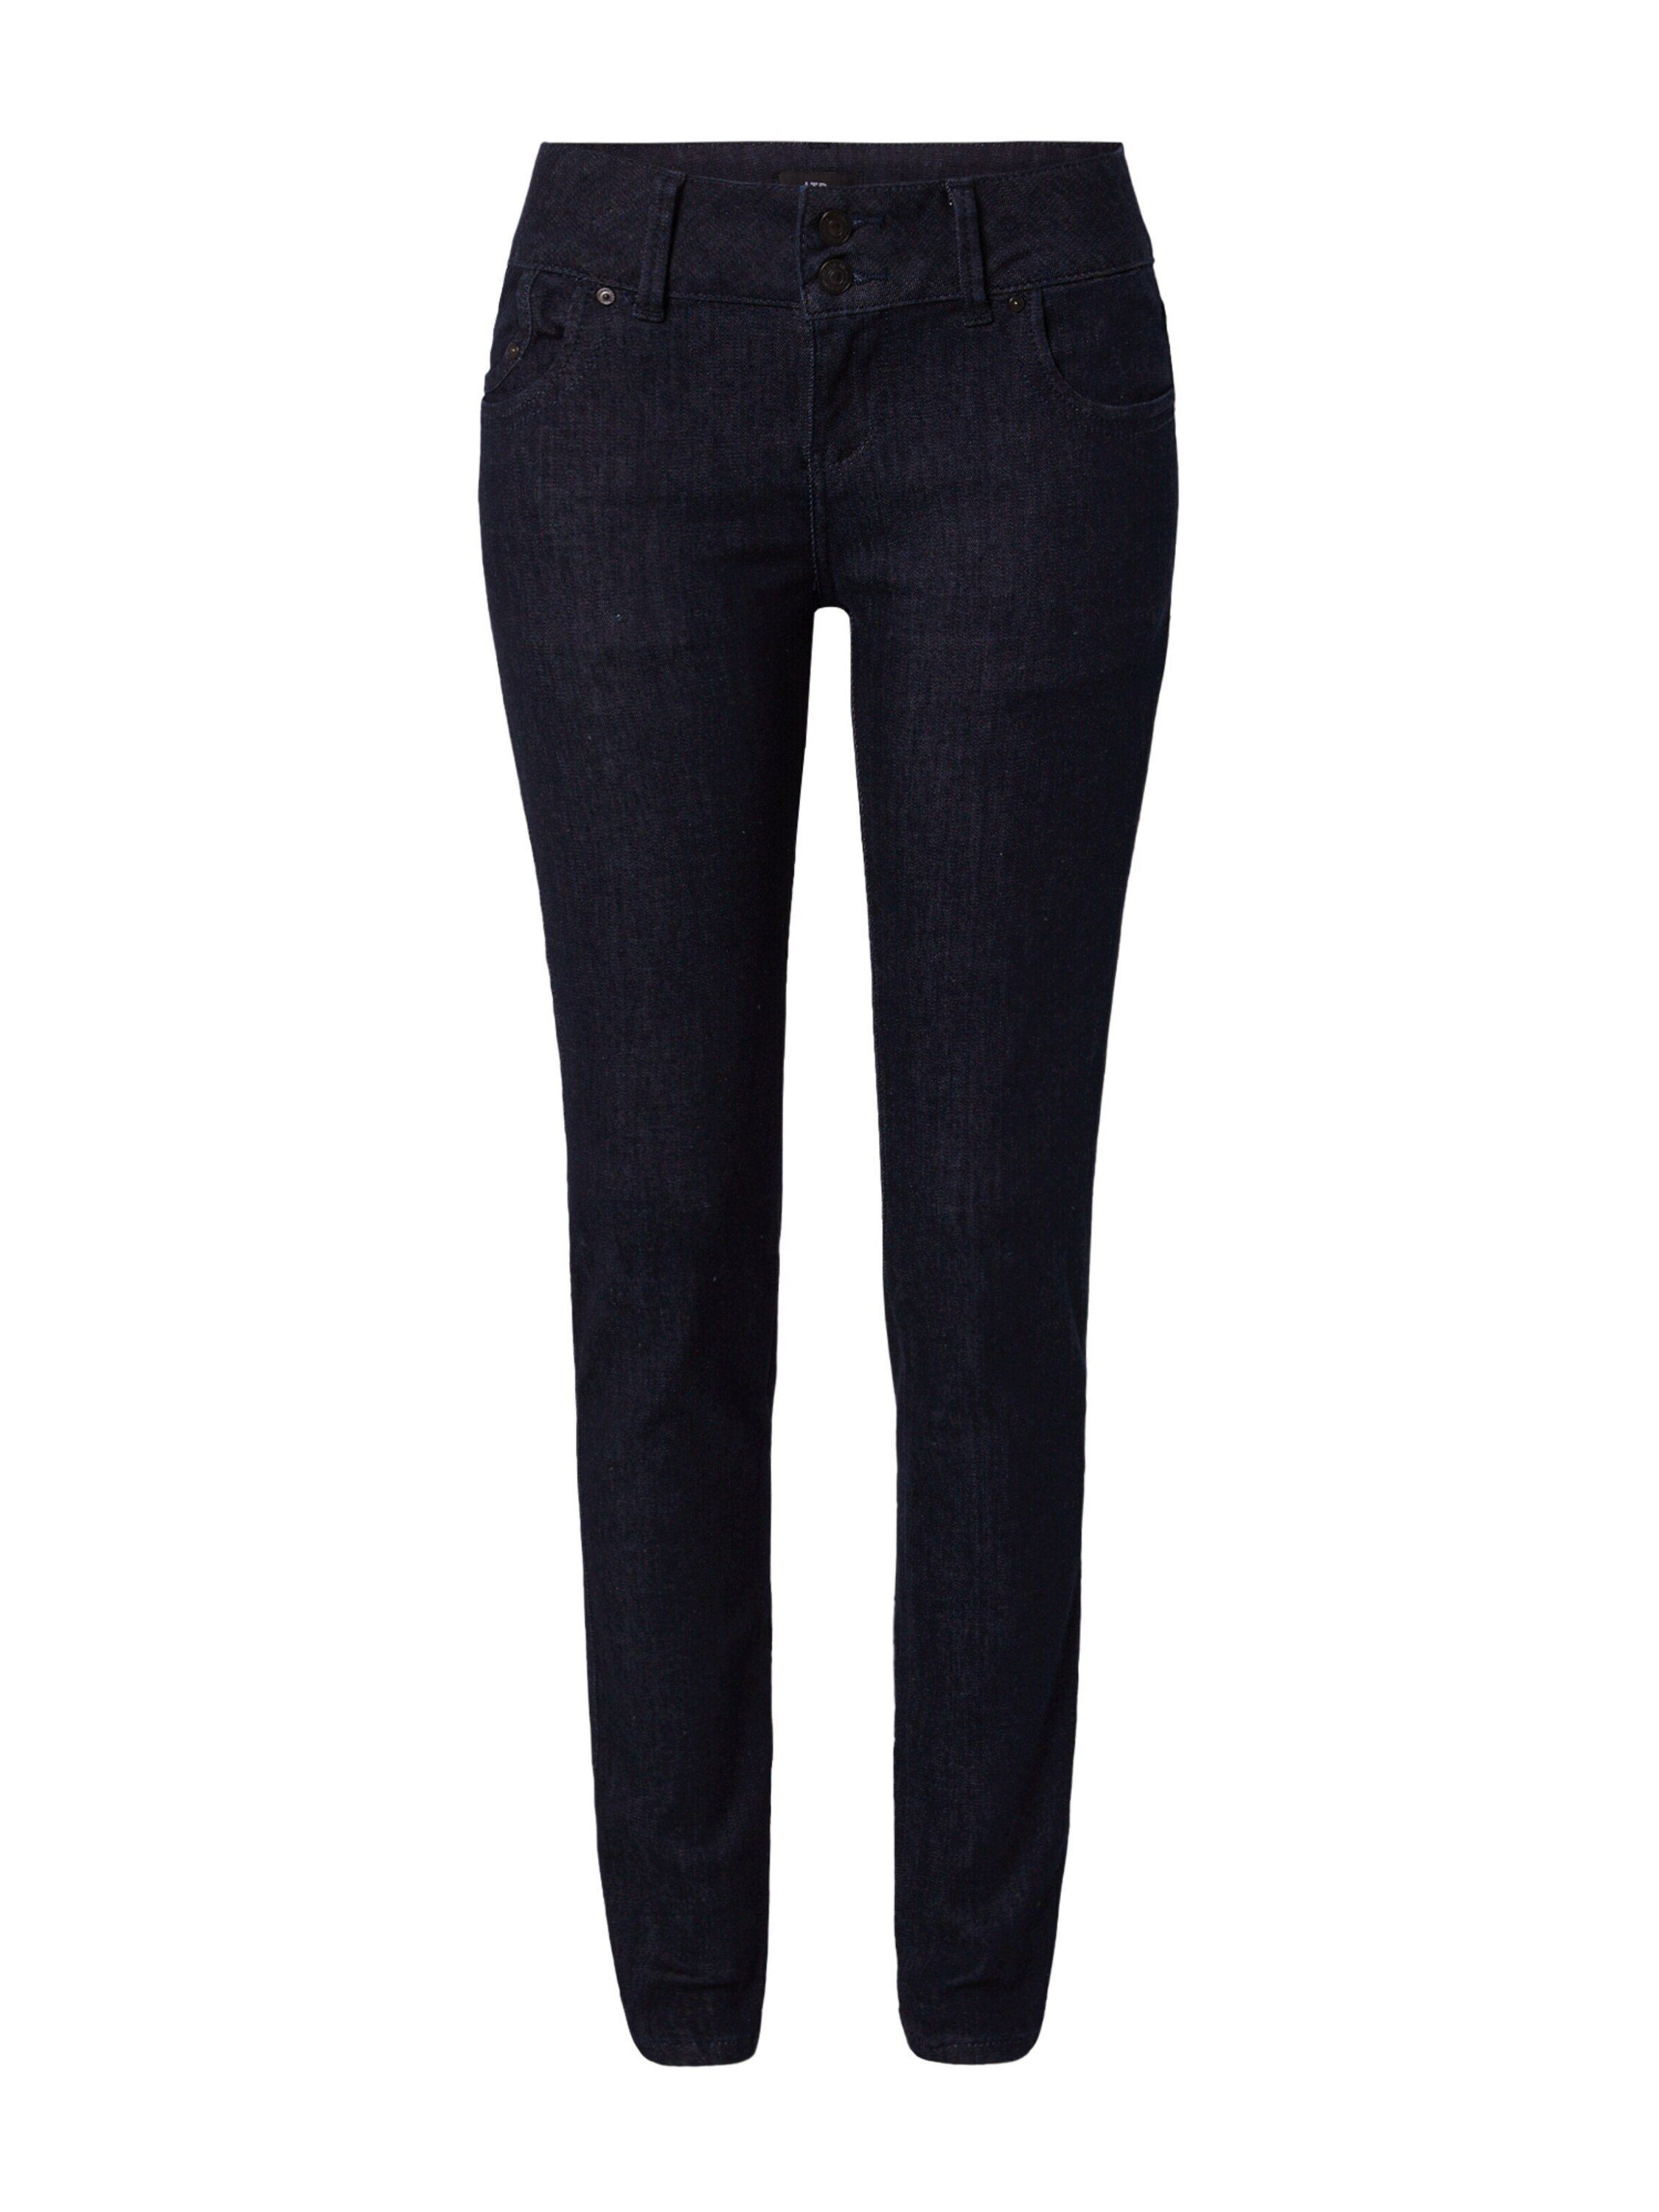 Weiteres Plain/ohne Slim-fit-Jeans Detail LTB Molly Details, (1-tlg)